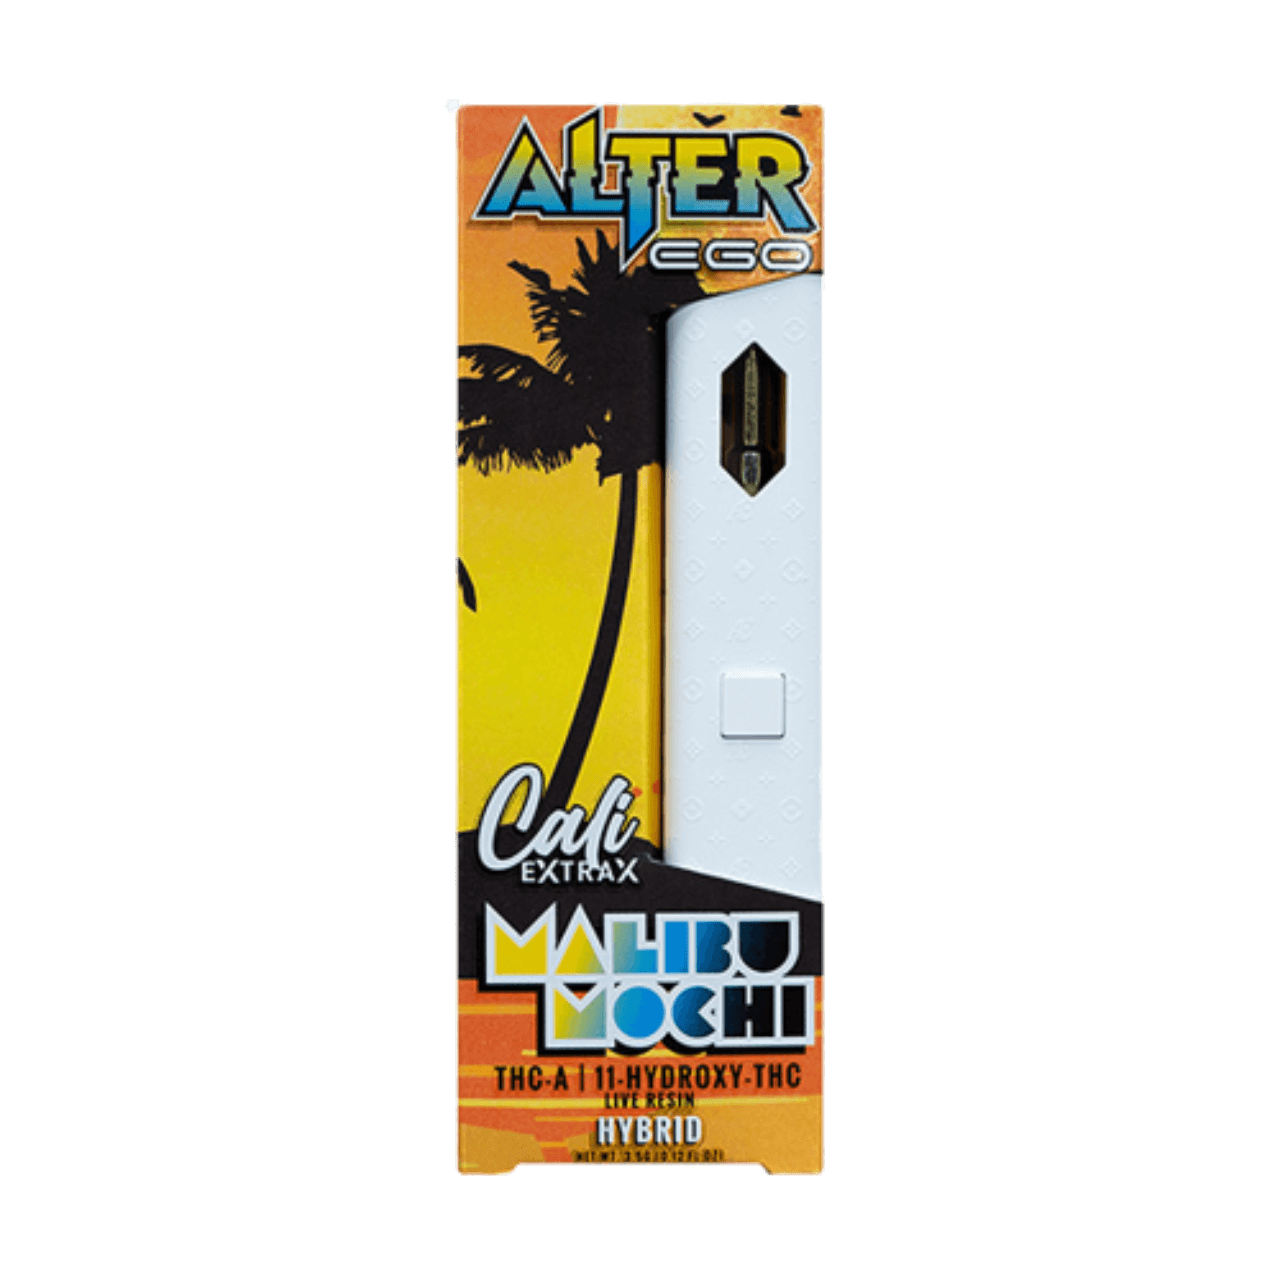 Cali Extrax x Ocho Extracts Alter Ego THC-A 11-Hydroxy-THC Live Resin Pre Heat 3.5G Disposable